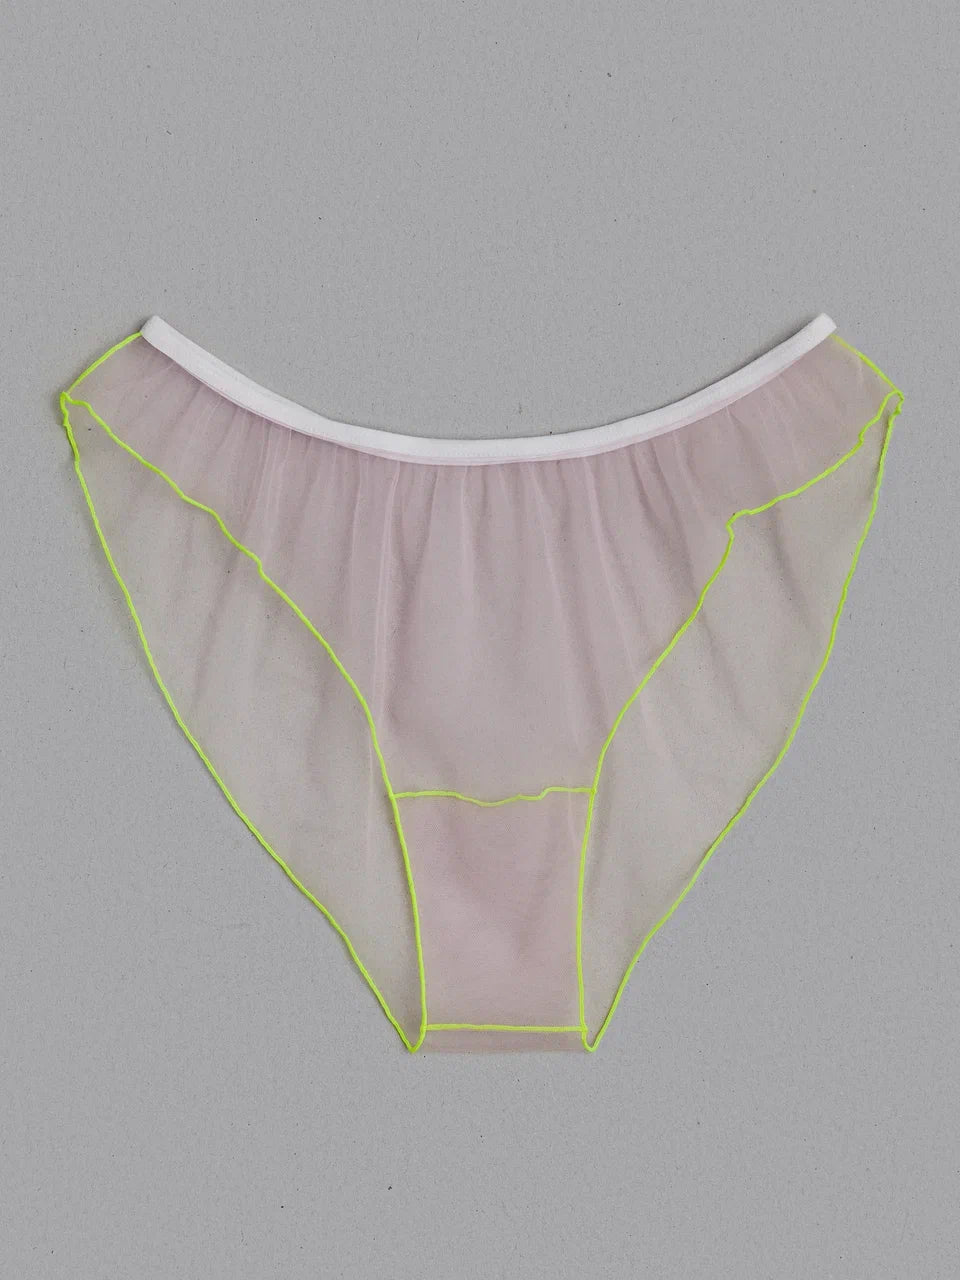 NEON PINK KNICKERS